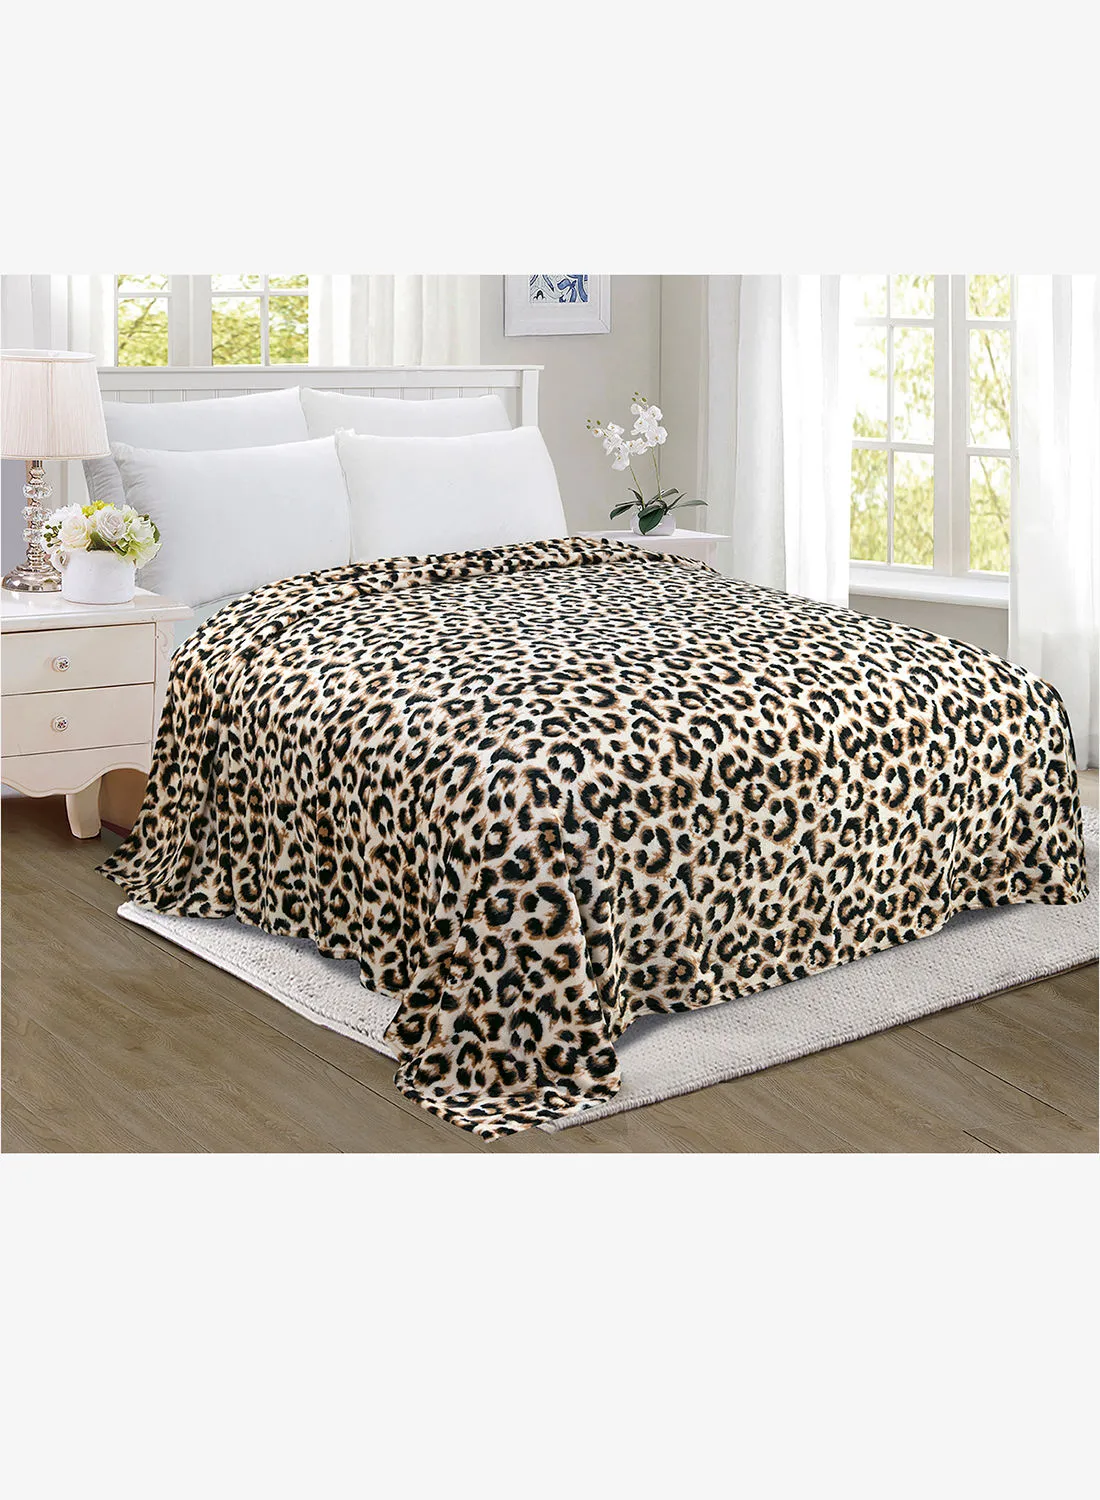 Noon East Lightweight Summer Blanket King Size 220 GSM Extra Soft Fleece All Season Blanket Bed And Sofa Throw  220x240 cms Leopard Print Leopard Print 220 x 240cm